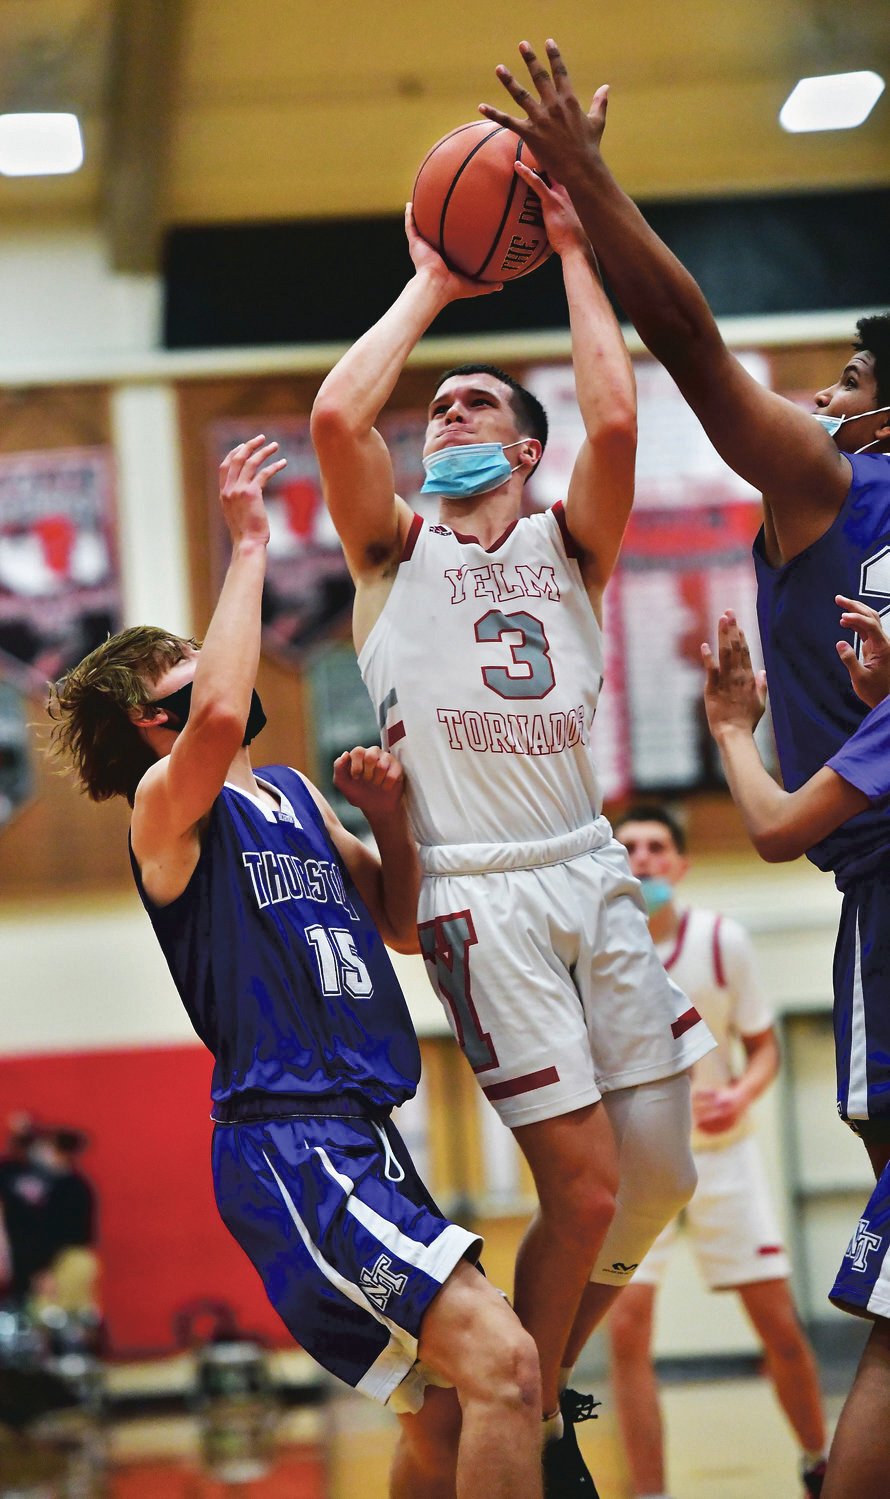 Yelm High School guard Jeshua Hardie, in white, shoots over North Thurston High School defender Tristan DeVere, left, during basketball action on Friday, May 21, in Yelm.